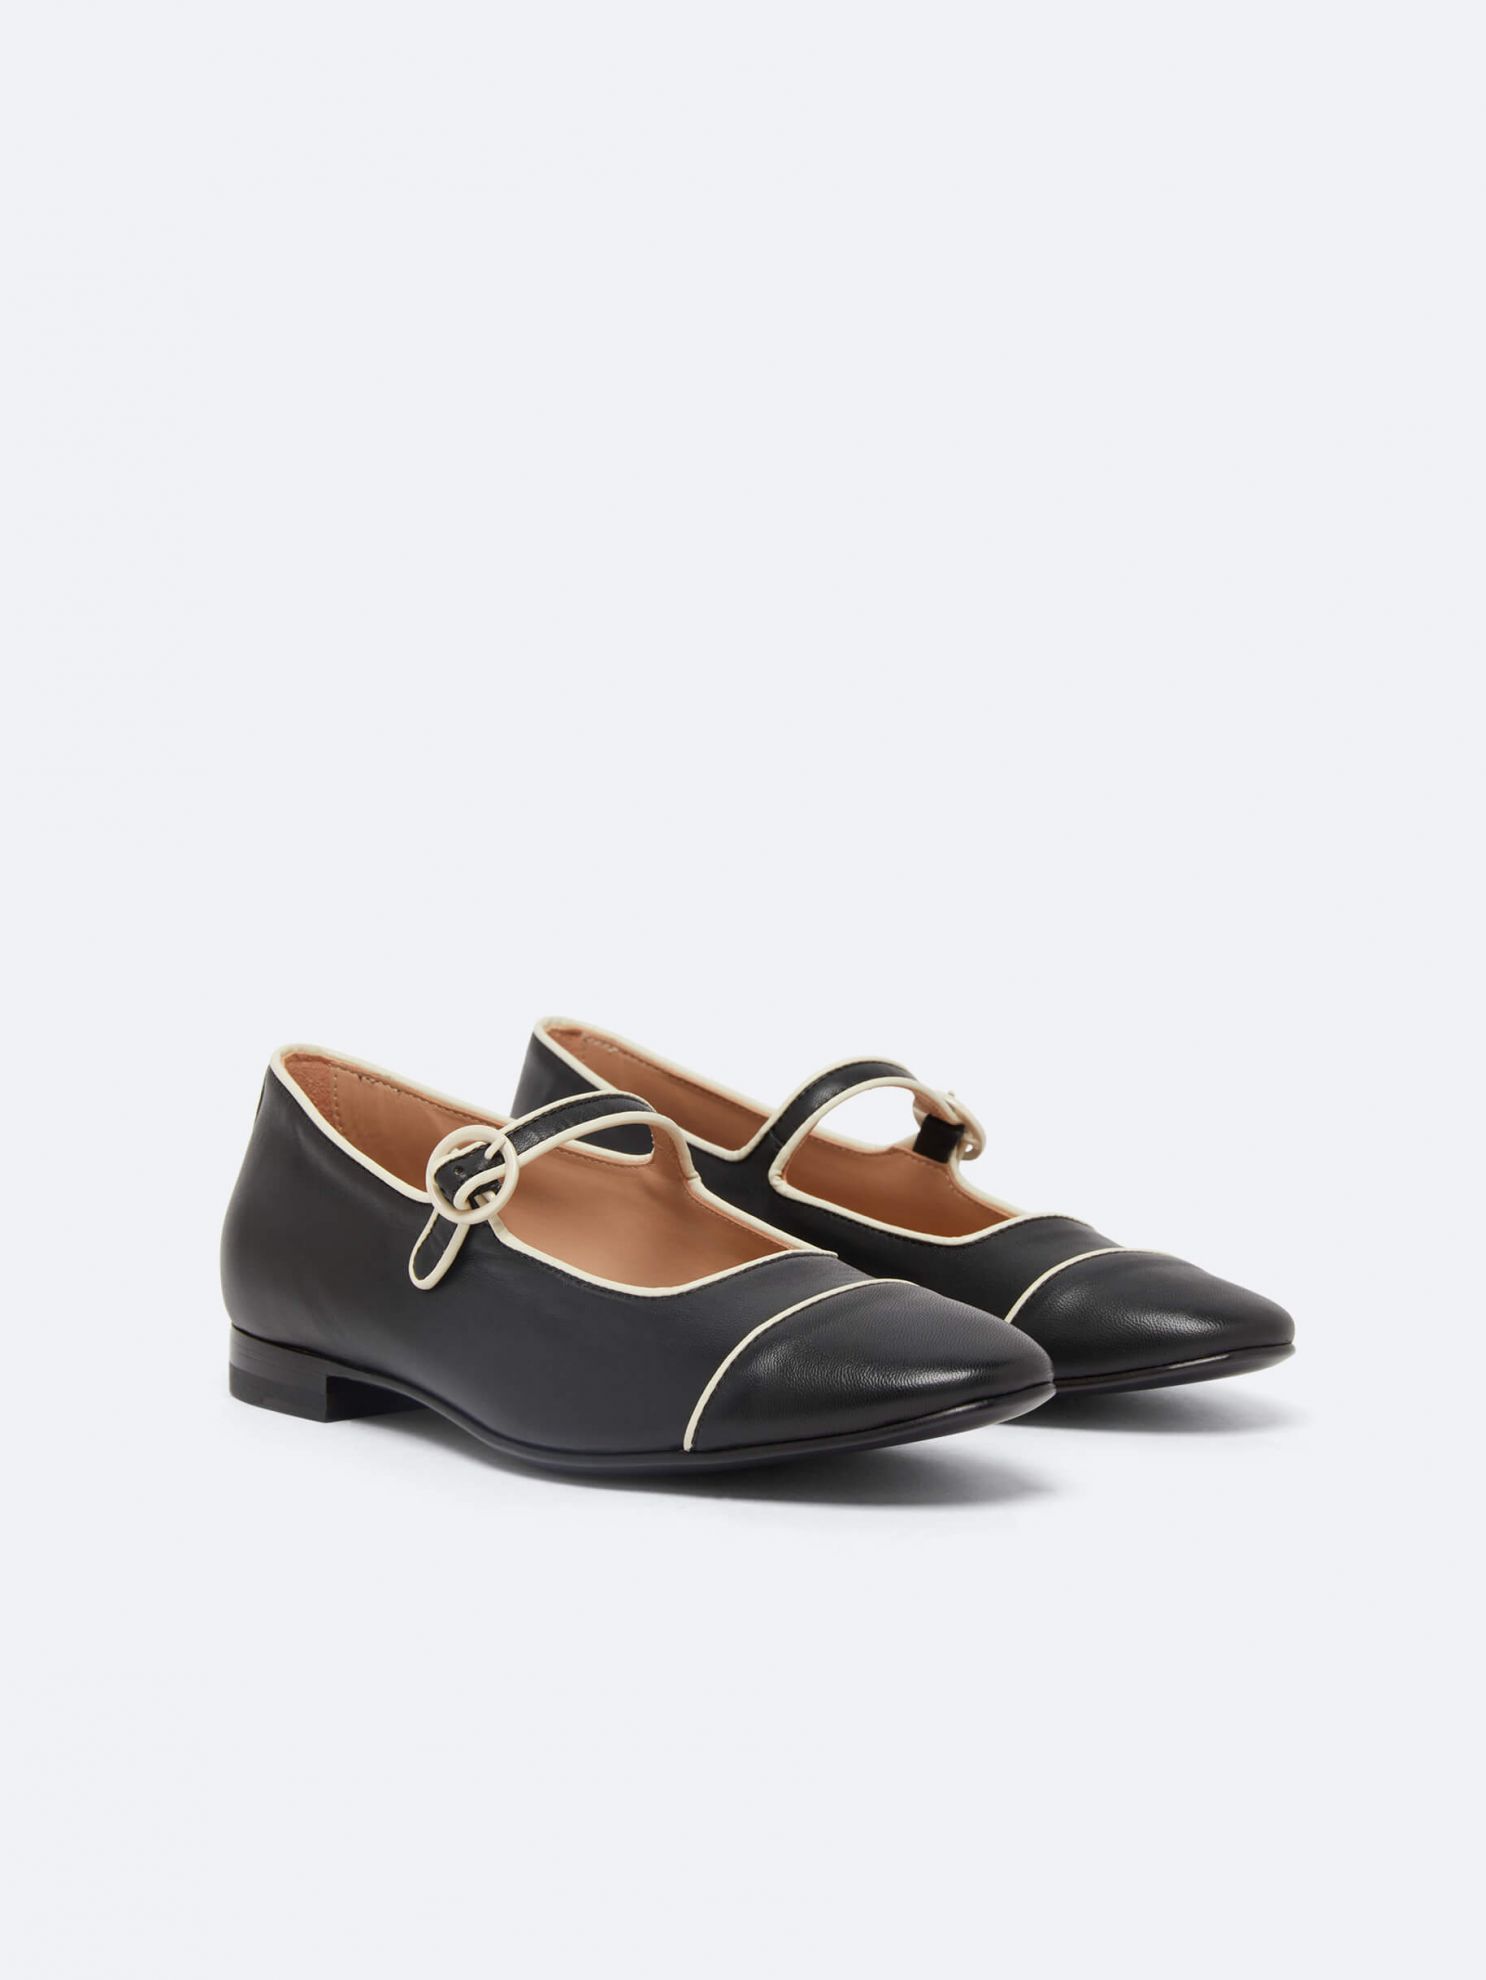 CORAIL black leather ivory piping Mary Janes | Carel Paris Shoes